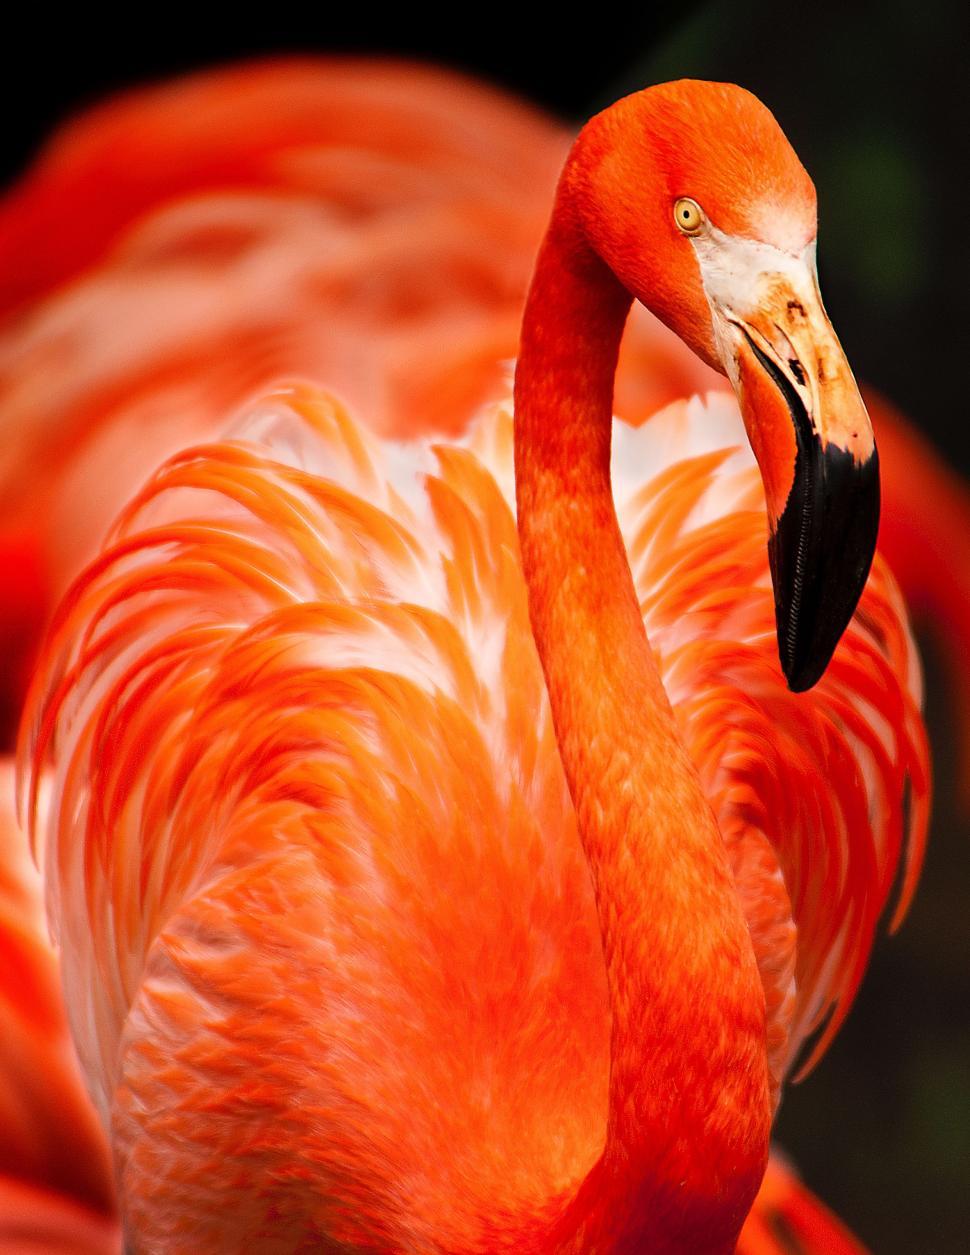 Free Image of Close Up of a Pink Flamingo Against Black Background 